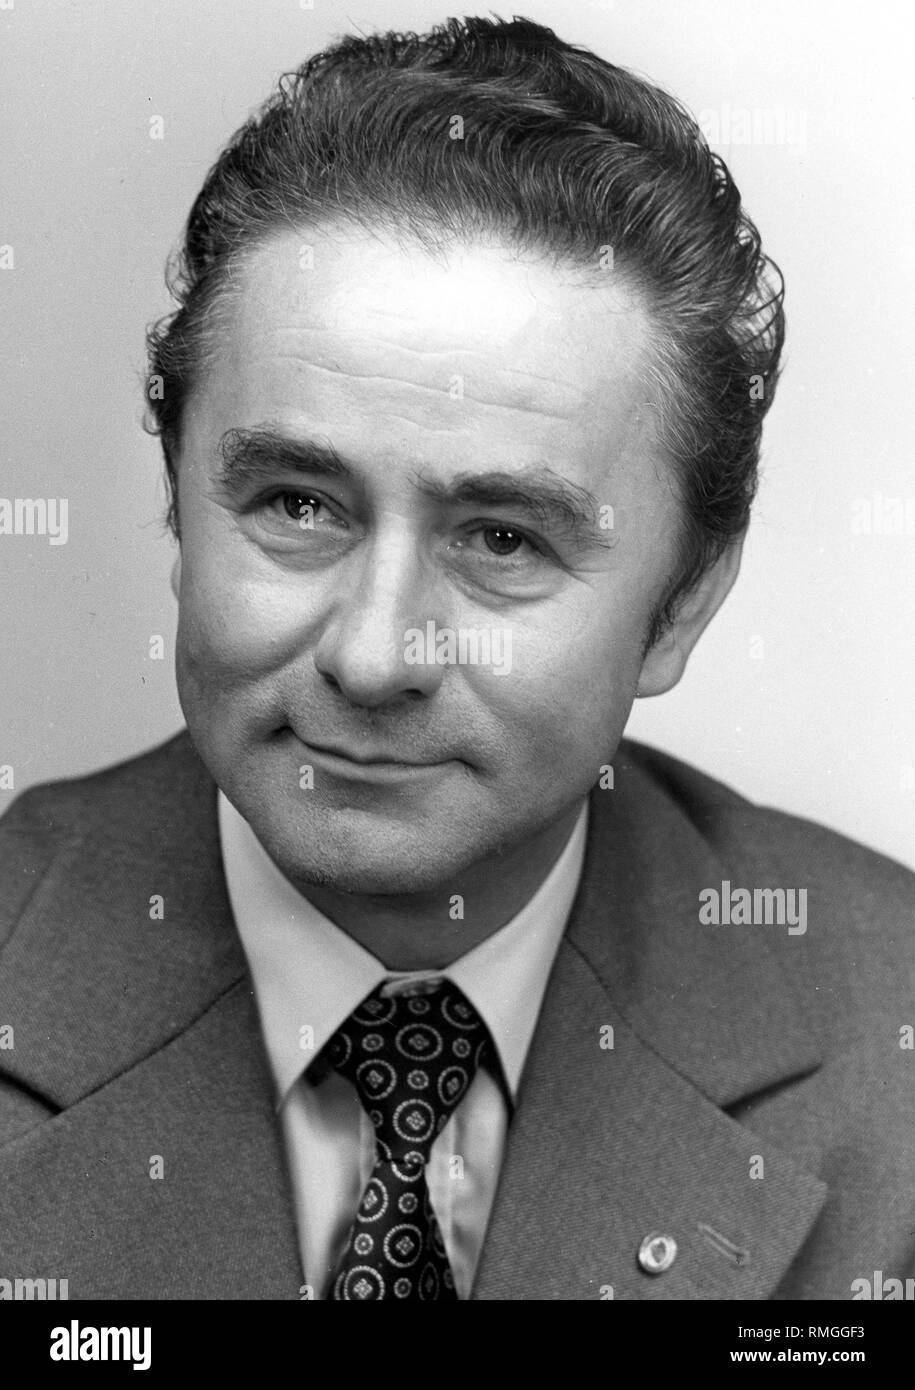 Heinz Kuhrig - (04.03.1929 - on 13.09.2001 he committed suicide) between 1973 - 1982 Minister of Agriculture of the GDR, between 1976 - 1989 Member of the Central Committee of SED, between 1976 - 1989 Member of the People's Chamber of the GDR. Stock Photo